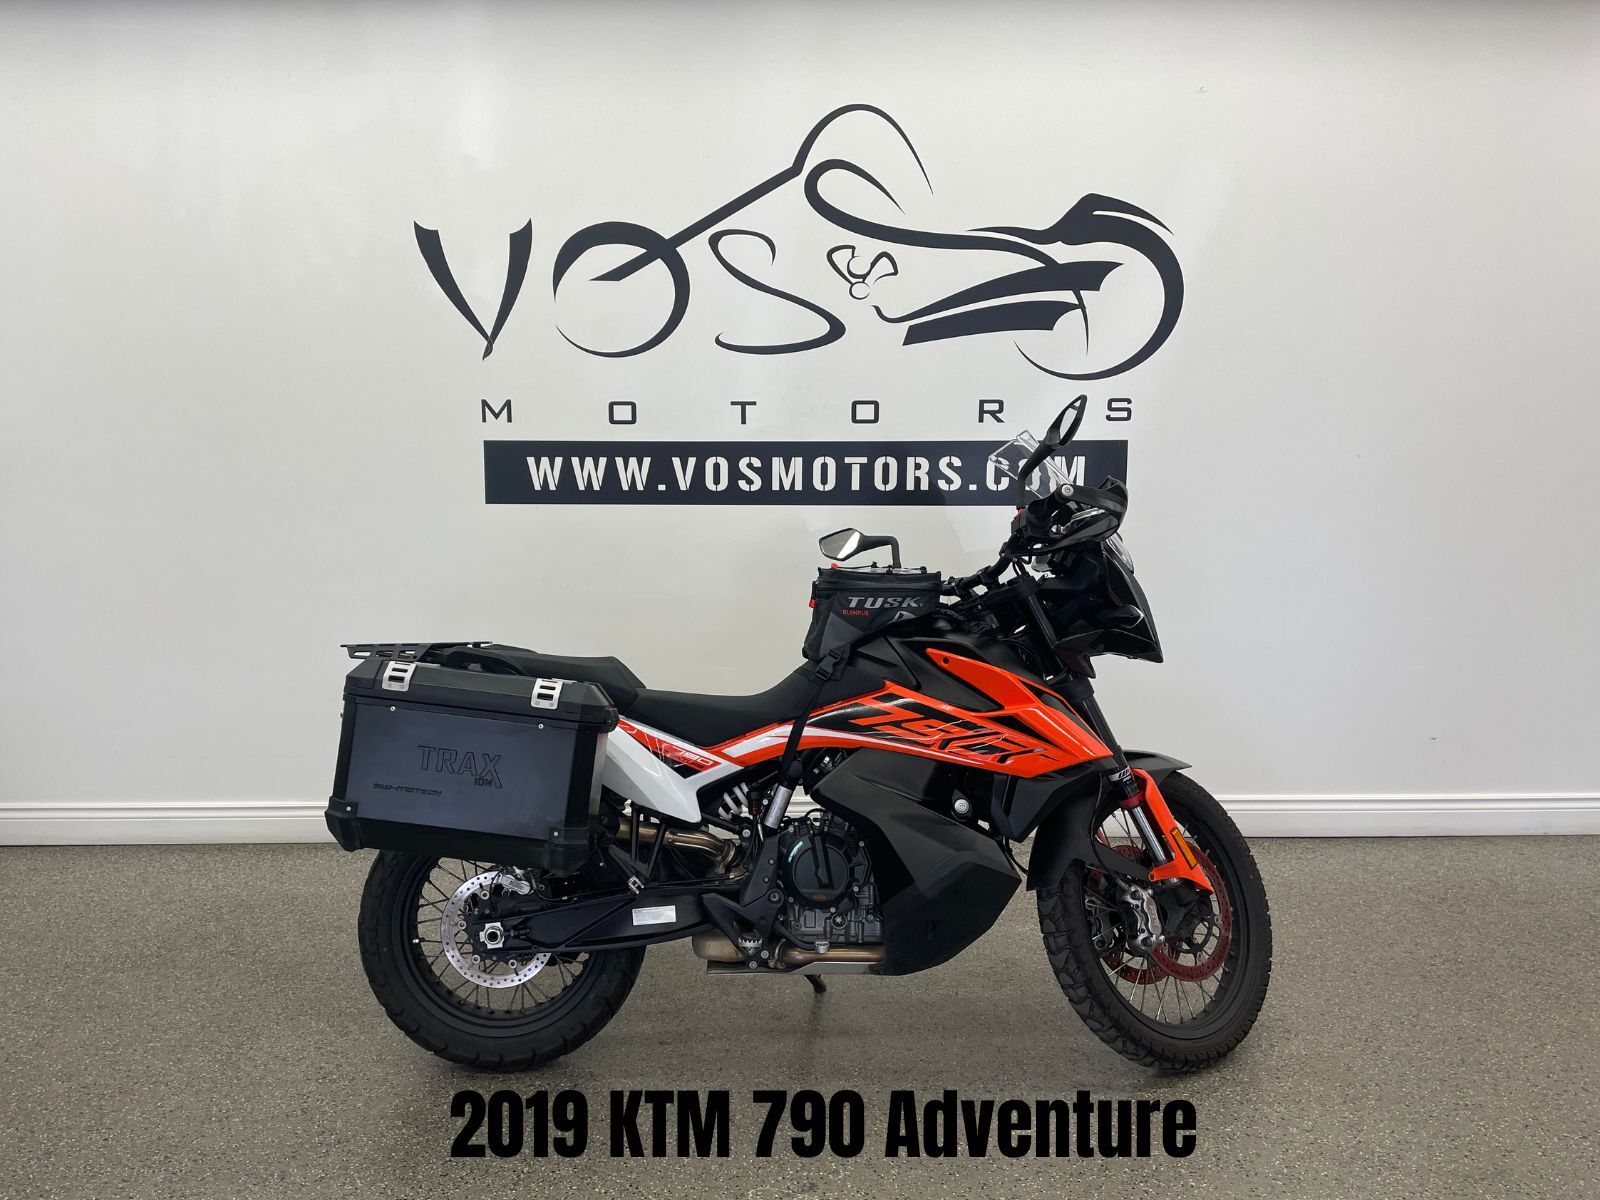 2019 KTM Adventure 790 ABS - V5190NP - -No Payments for 1 Year**